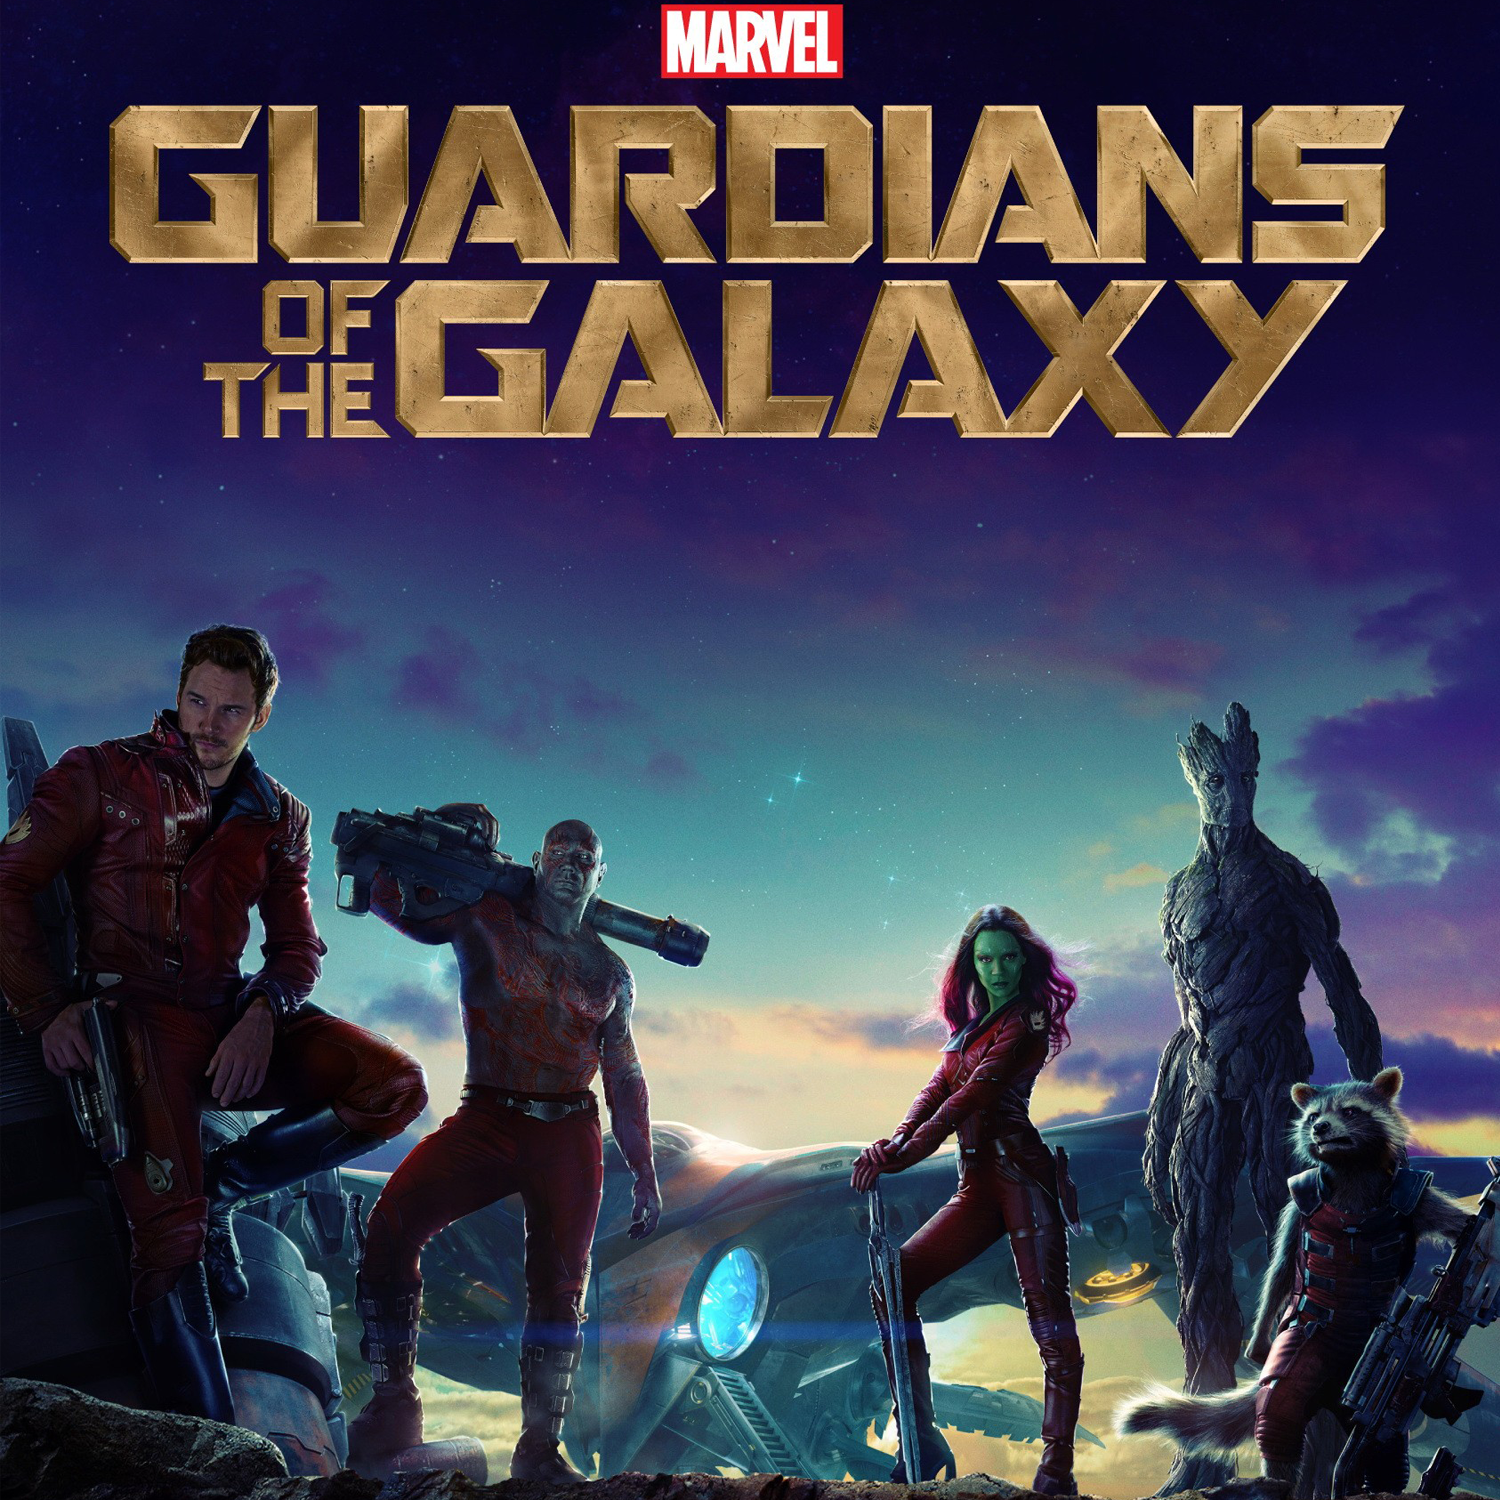 Guardians of the Galaxy (2015)